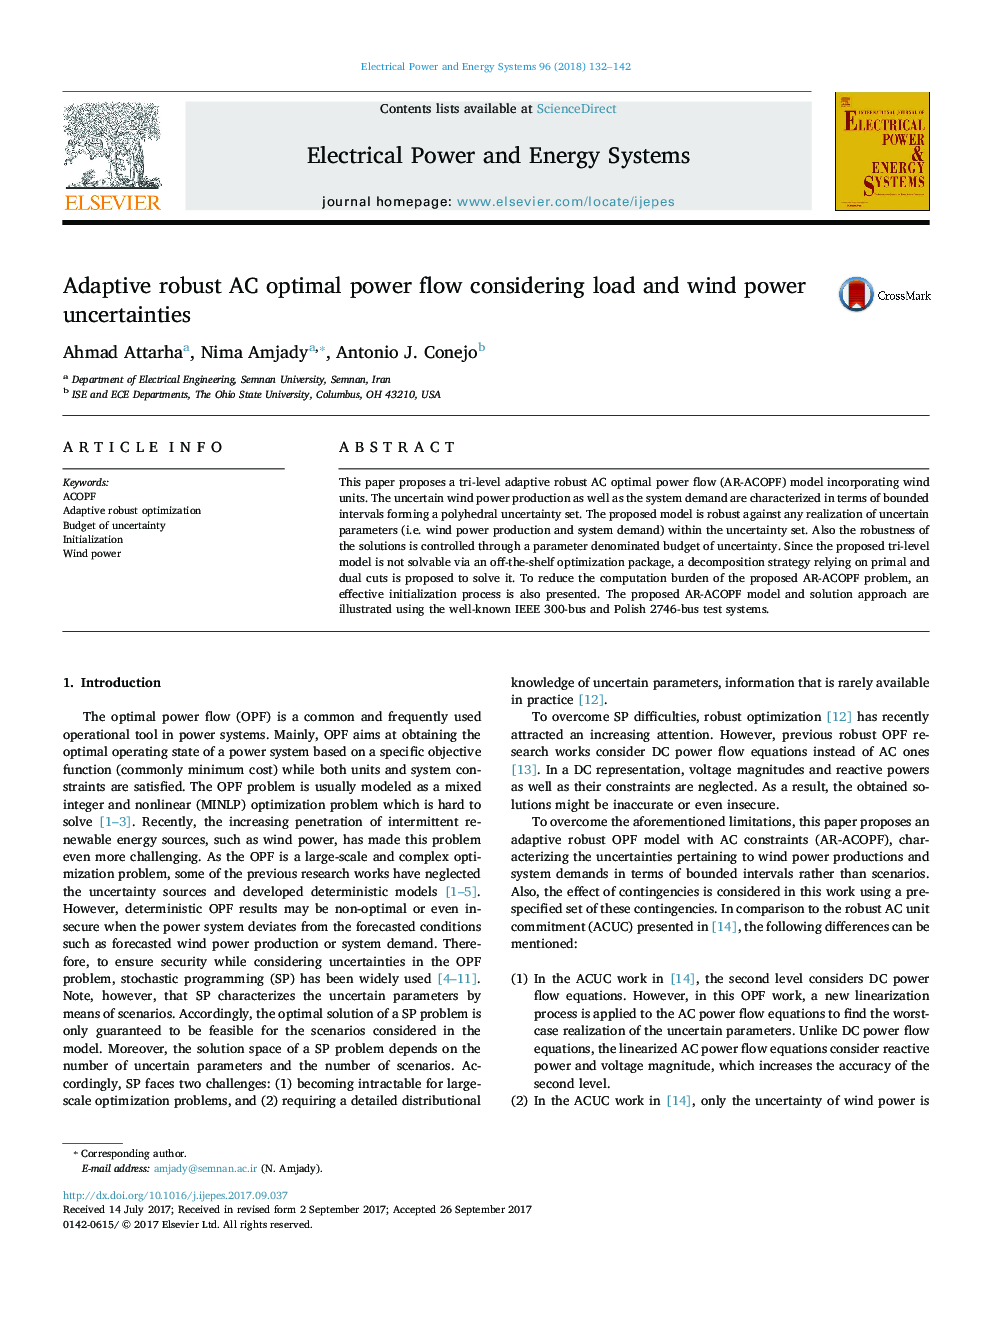 Adaptive robust AC optimal power flow considering load and wind power uncertainties